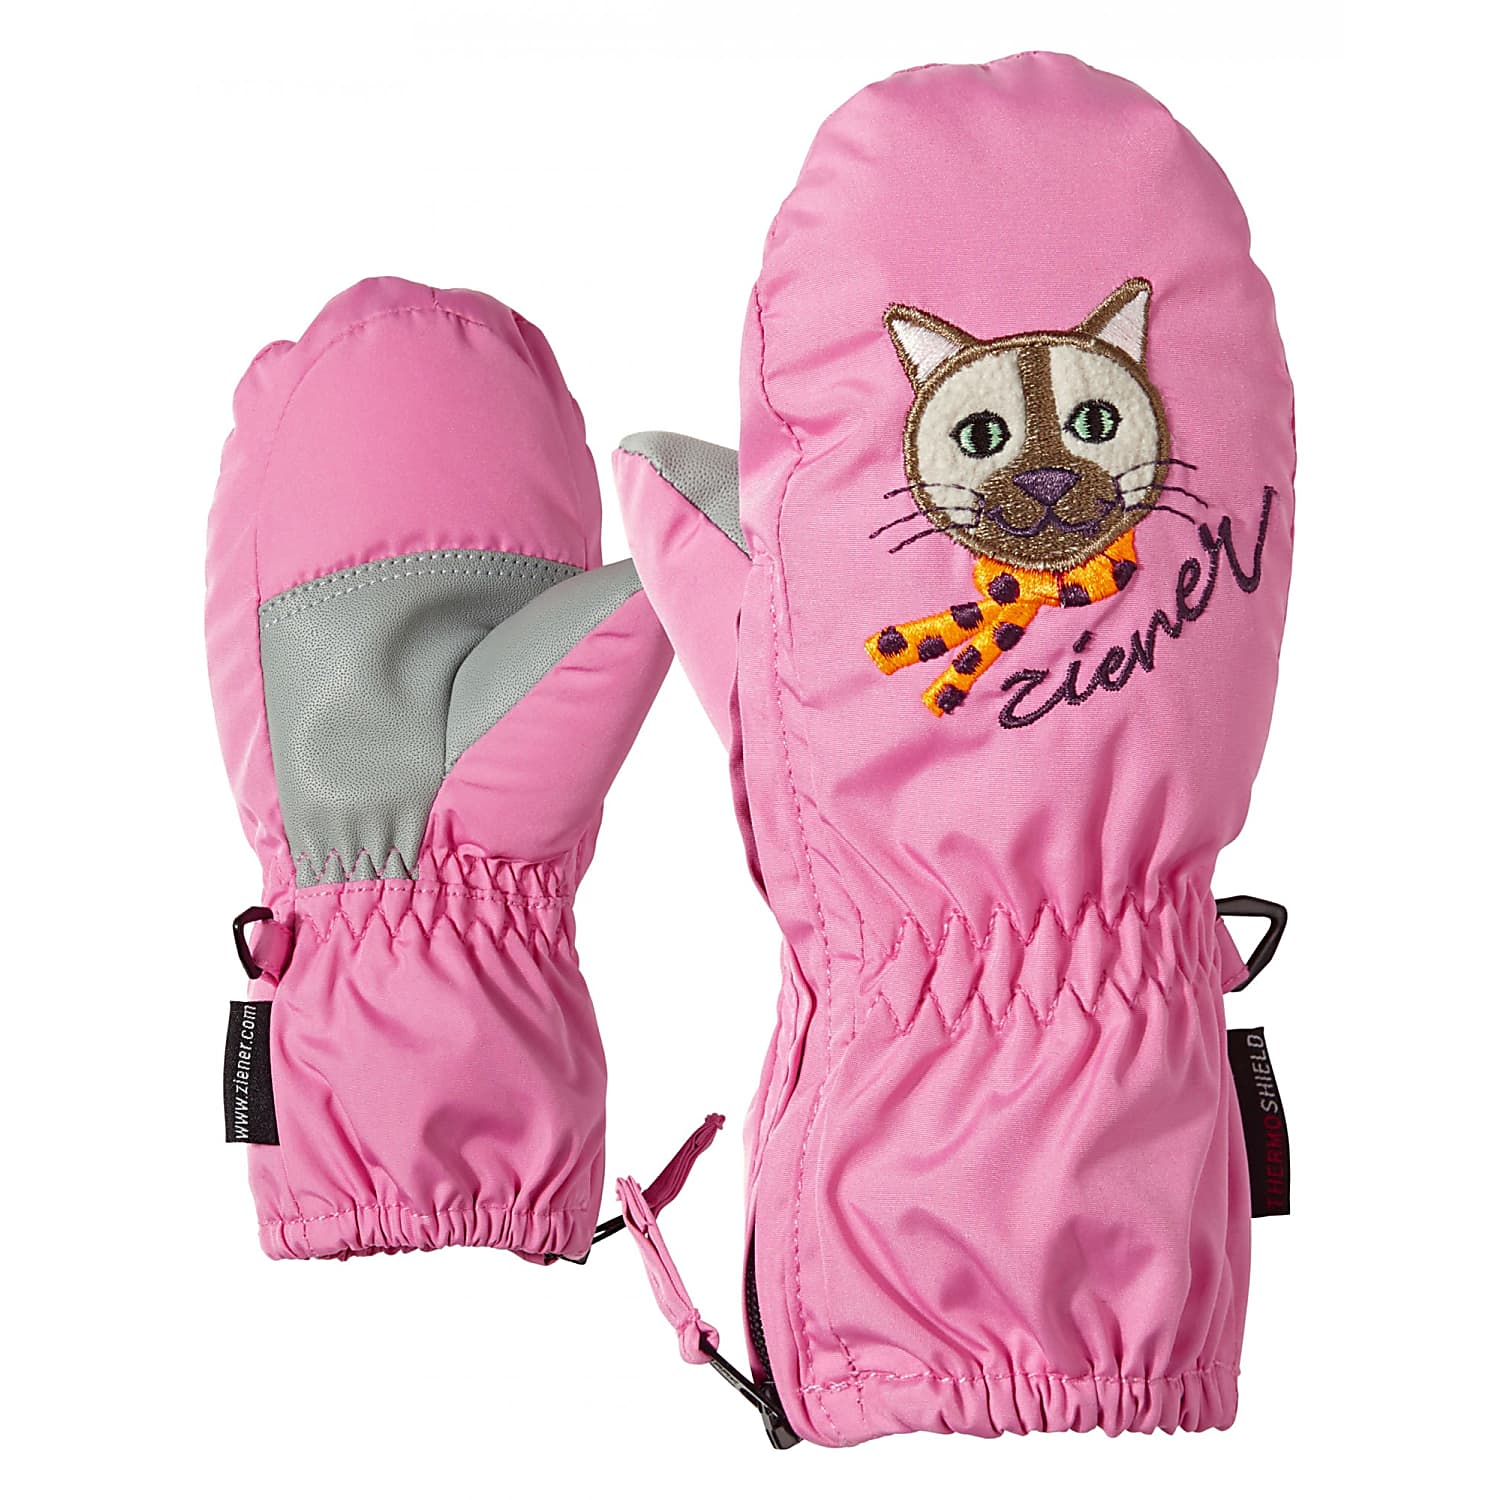 MITTEN, TODDLER ZOO Fast Pink and - Ziener LE shipping Flamingo MINIS cheap